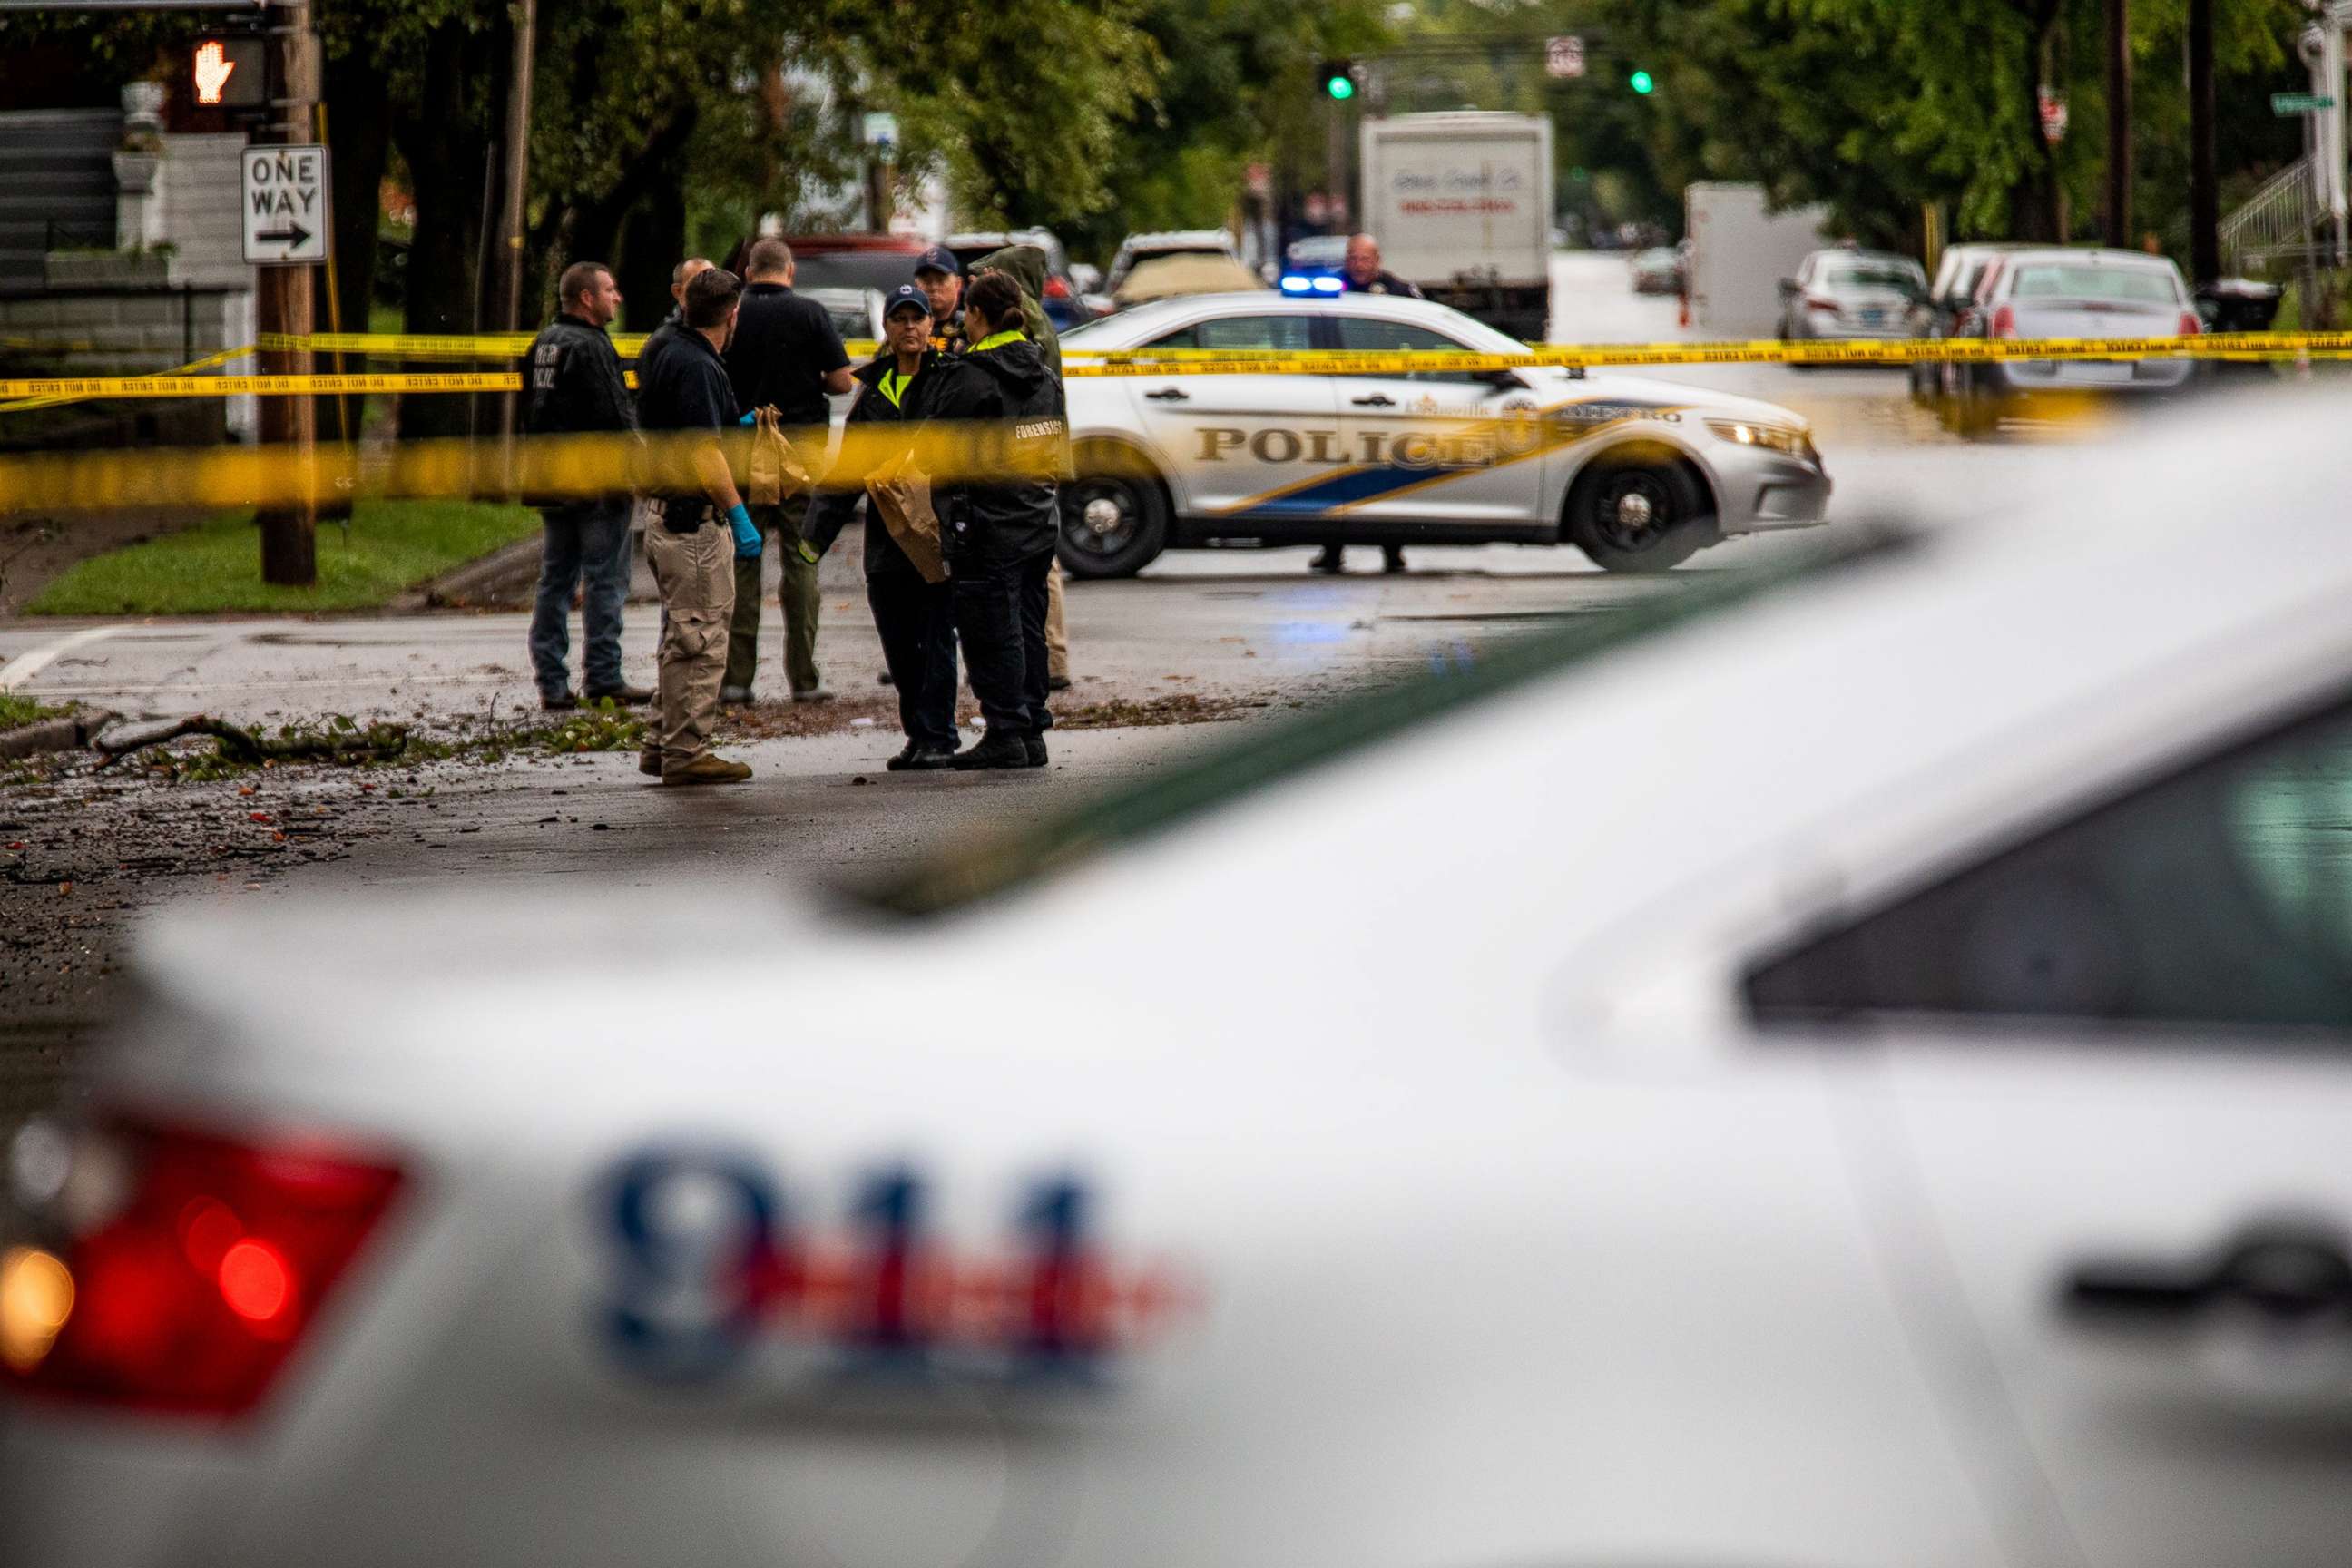 PHOTO: Police investigators stand at the corner of Dr. W.J. Hodge and W. Chestnut streets in Louisville, Ky., after a teenage boy was fatally shot and another wounded in a drive-by shooting at a bus stop, early on Sept. 22, 2021.